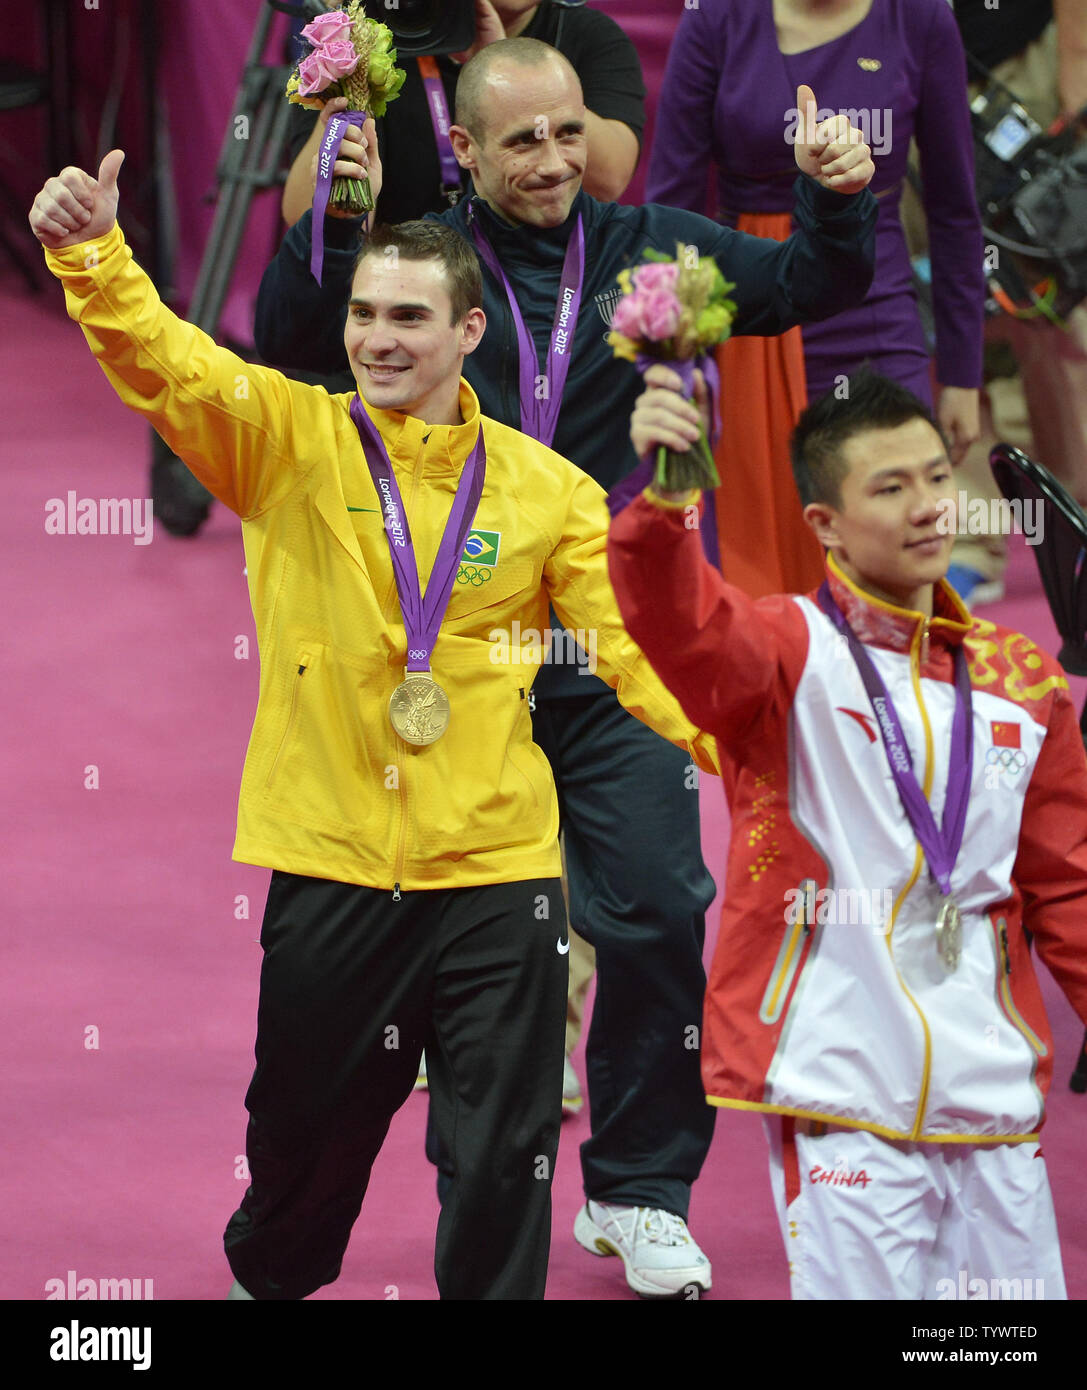 Gymnastics medal winners for the Apparatus Finals on the rings, Brazil's Arthur Nabarette Zanetti (gold medal), (L), China's Yibing Chen (silver medal), (R) and Italy's Matteo Morandi (bronze medal), wave to the fans during the awards ceremony, at the Greenwich North Arena at the 2012 Summer Olympics, August 6, 2012, in London, England.              UPI/Mike Theiler Stock Photo